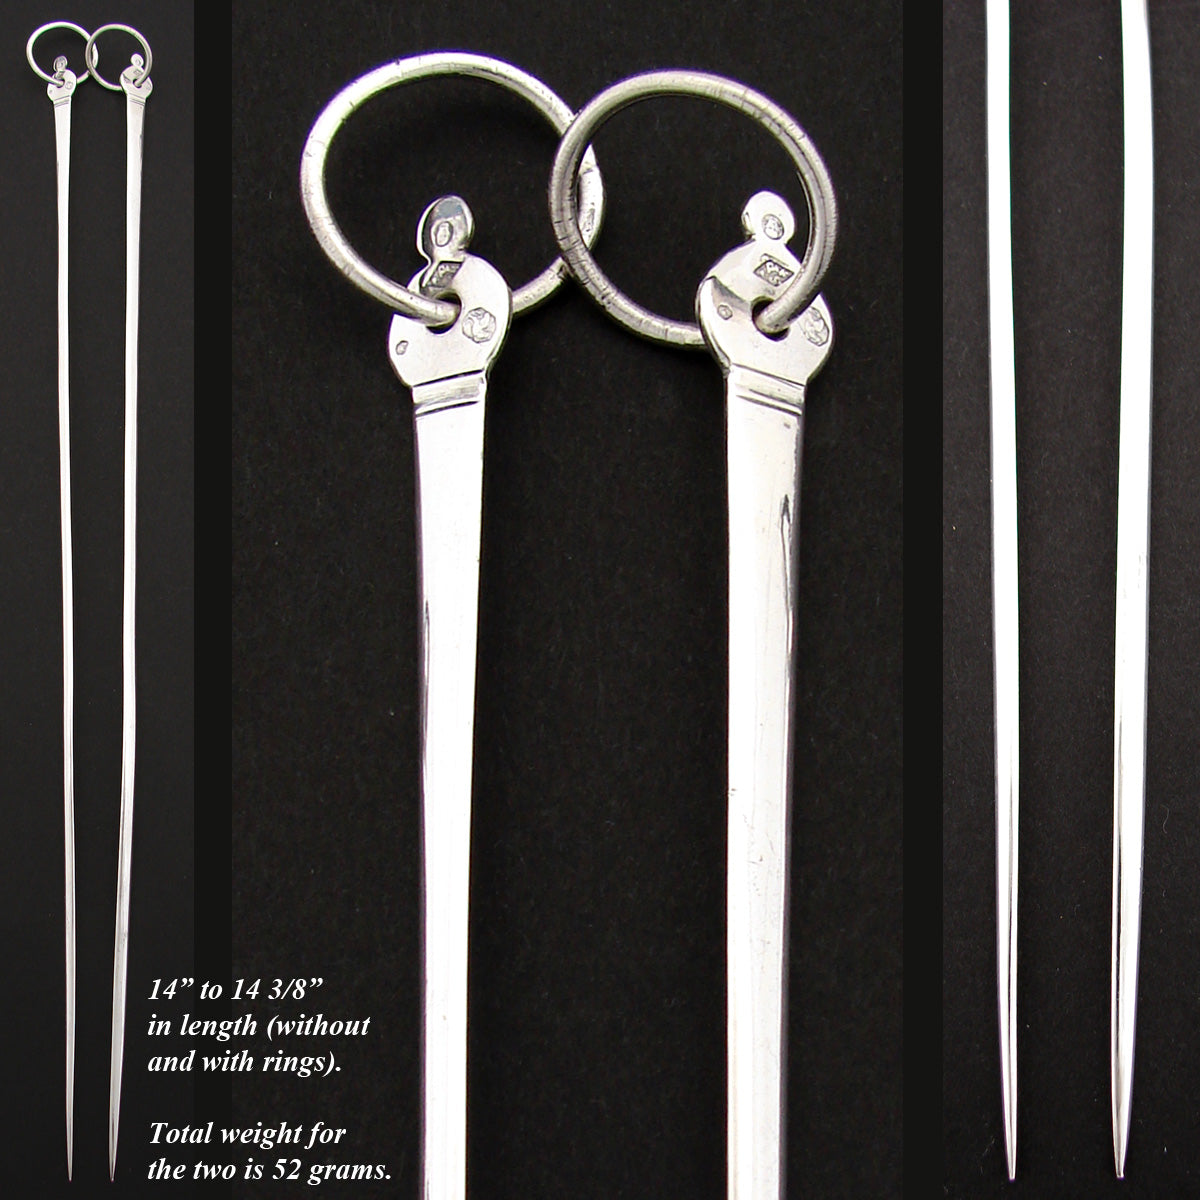 Rare Antique French 1798-1809 Hallmarked Sterling Silver 14” Skewer or “Hatelet” Pair